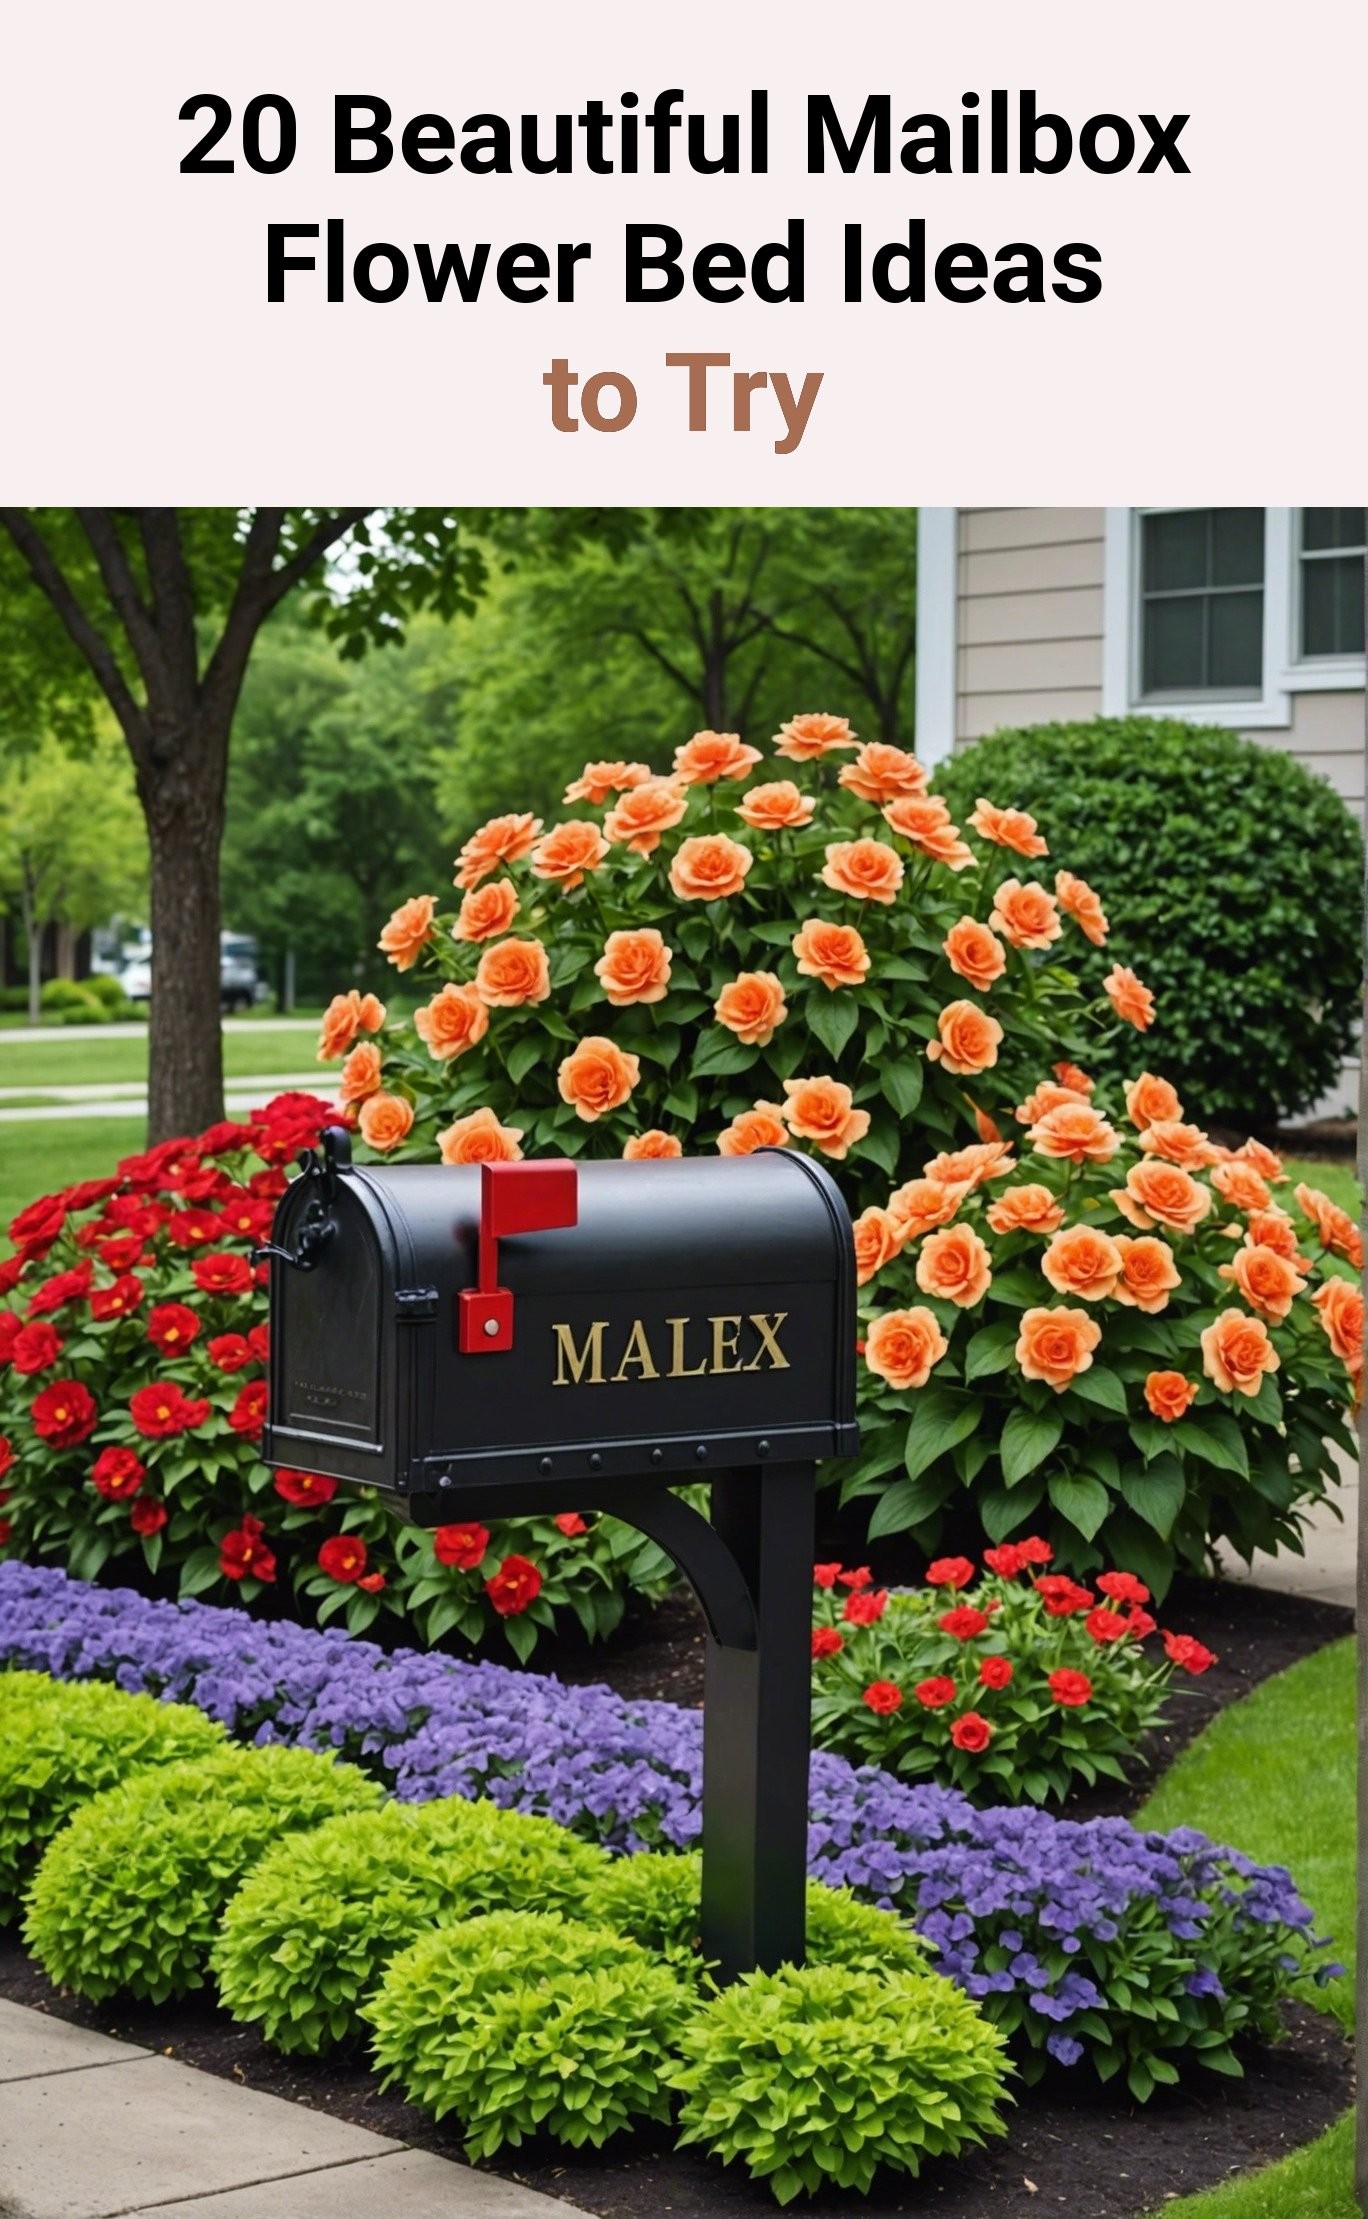 20 Beautiful Mailbox Flower Bed Ideas to Try